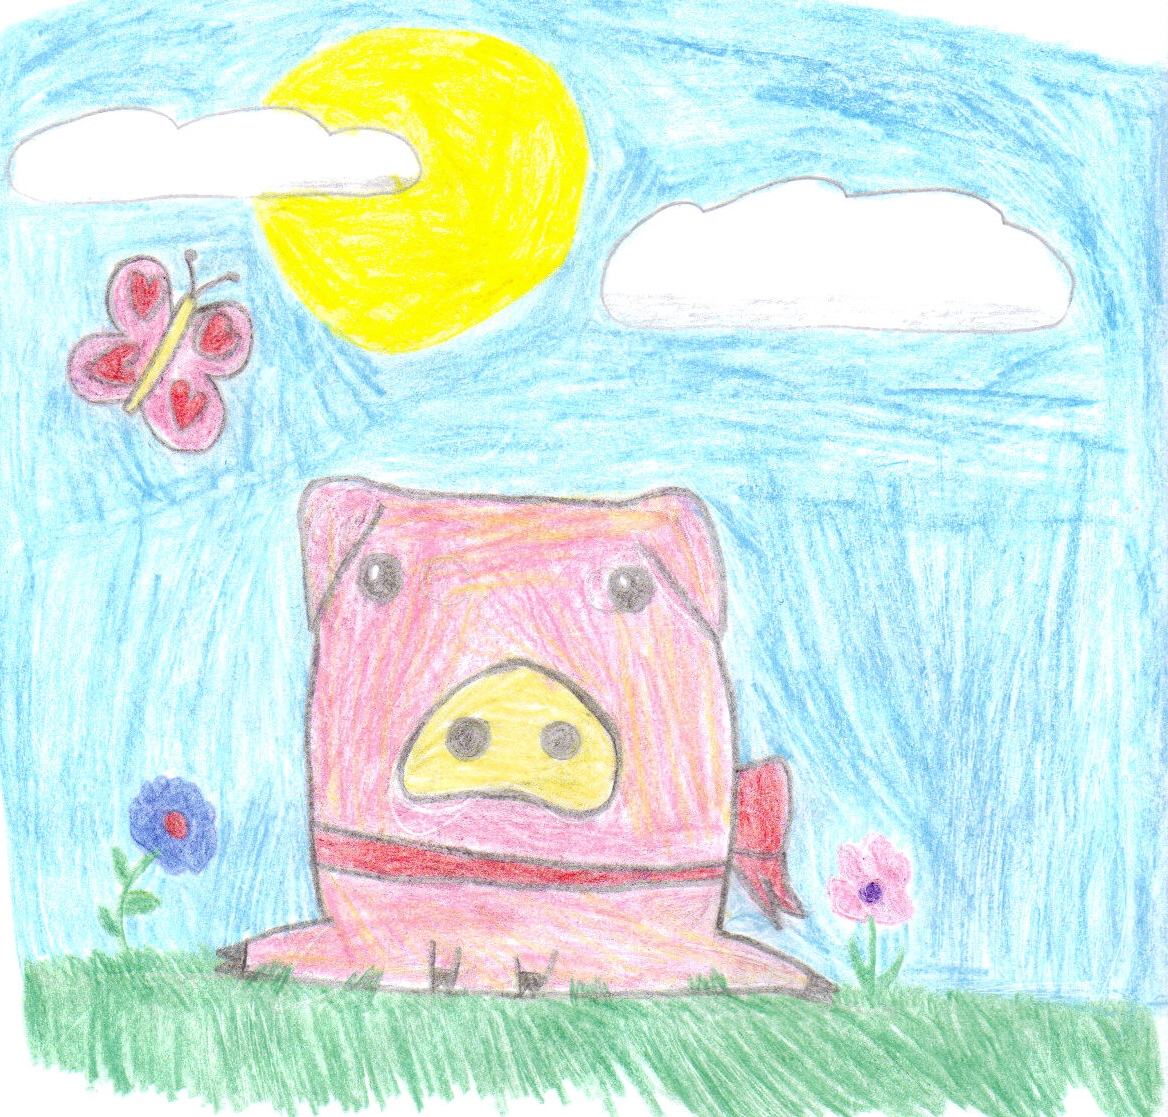 my pig wilbur from harvest moon magical melody by Jbelle